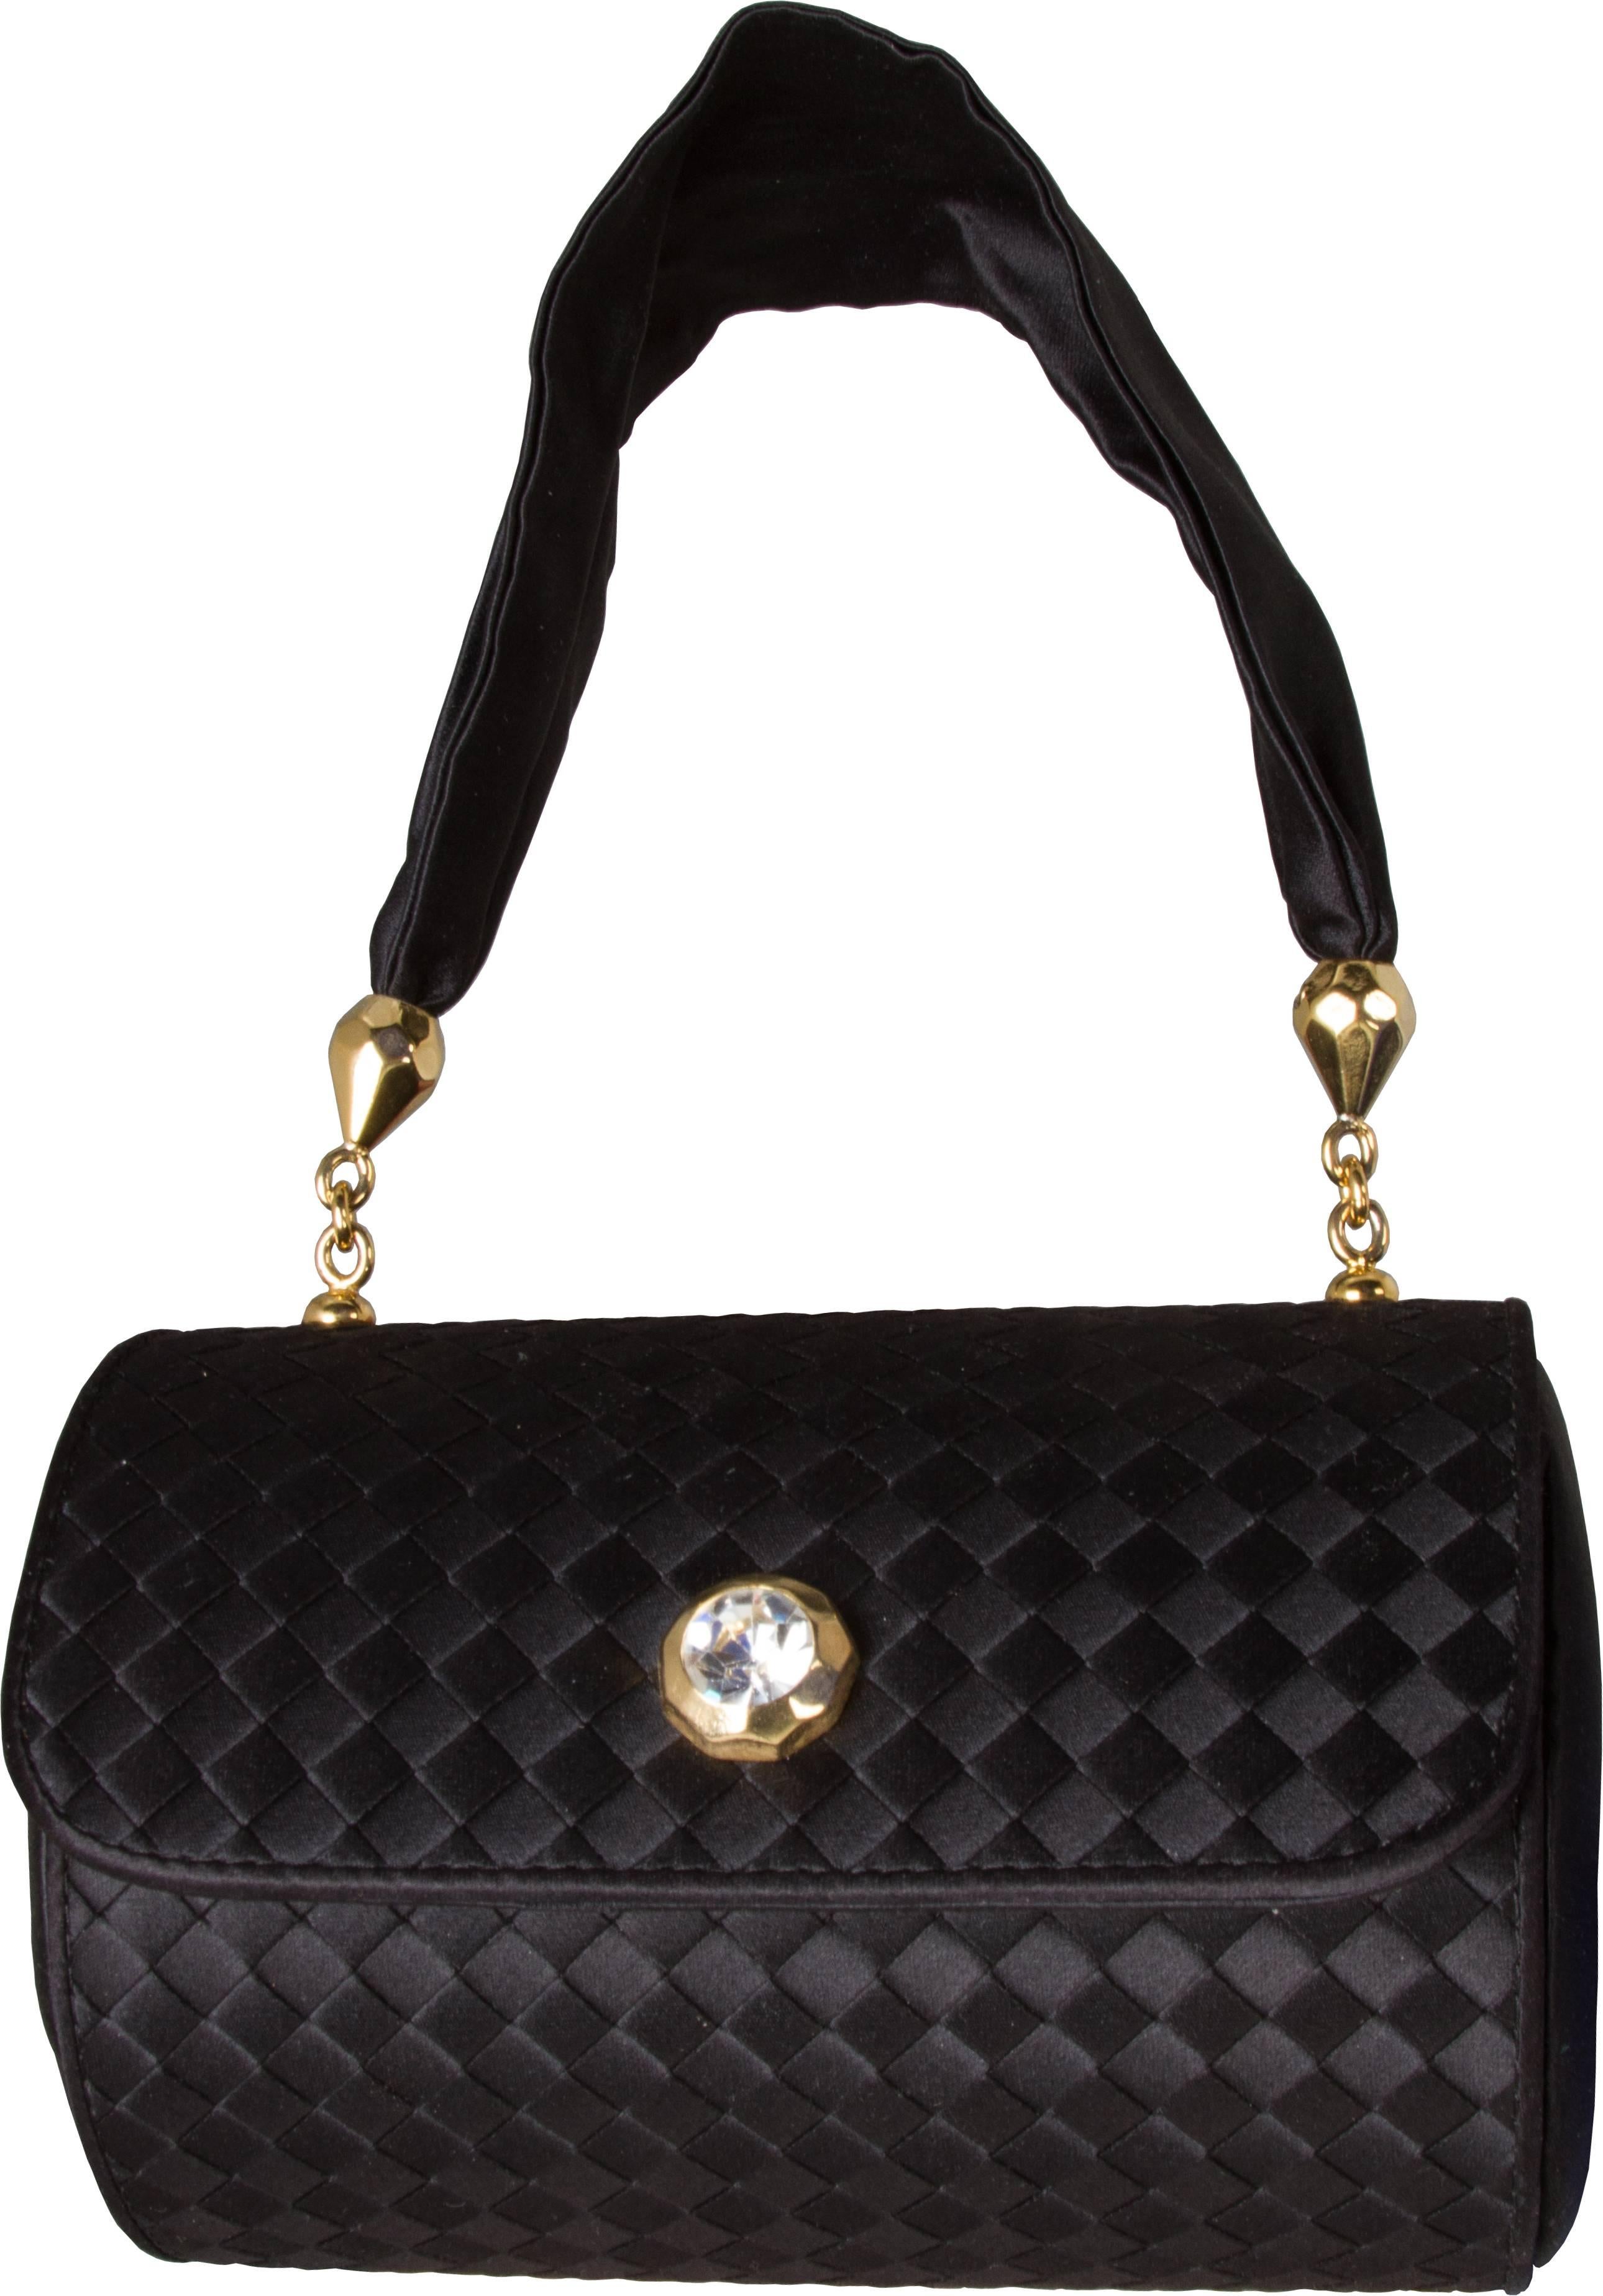 This is an elegant barrel bag accented with gold gilt hardware and a rhinestone closure. 